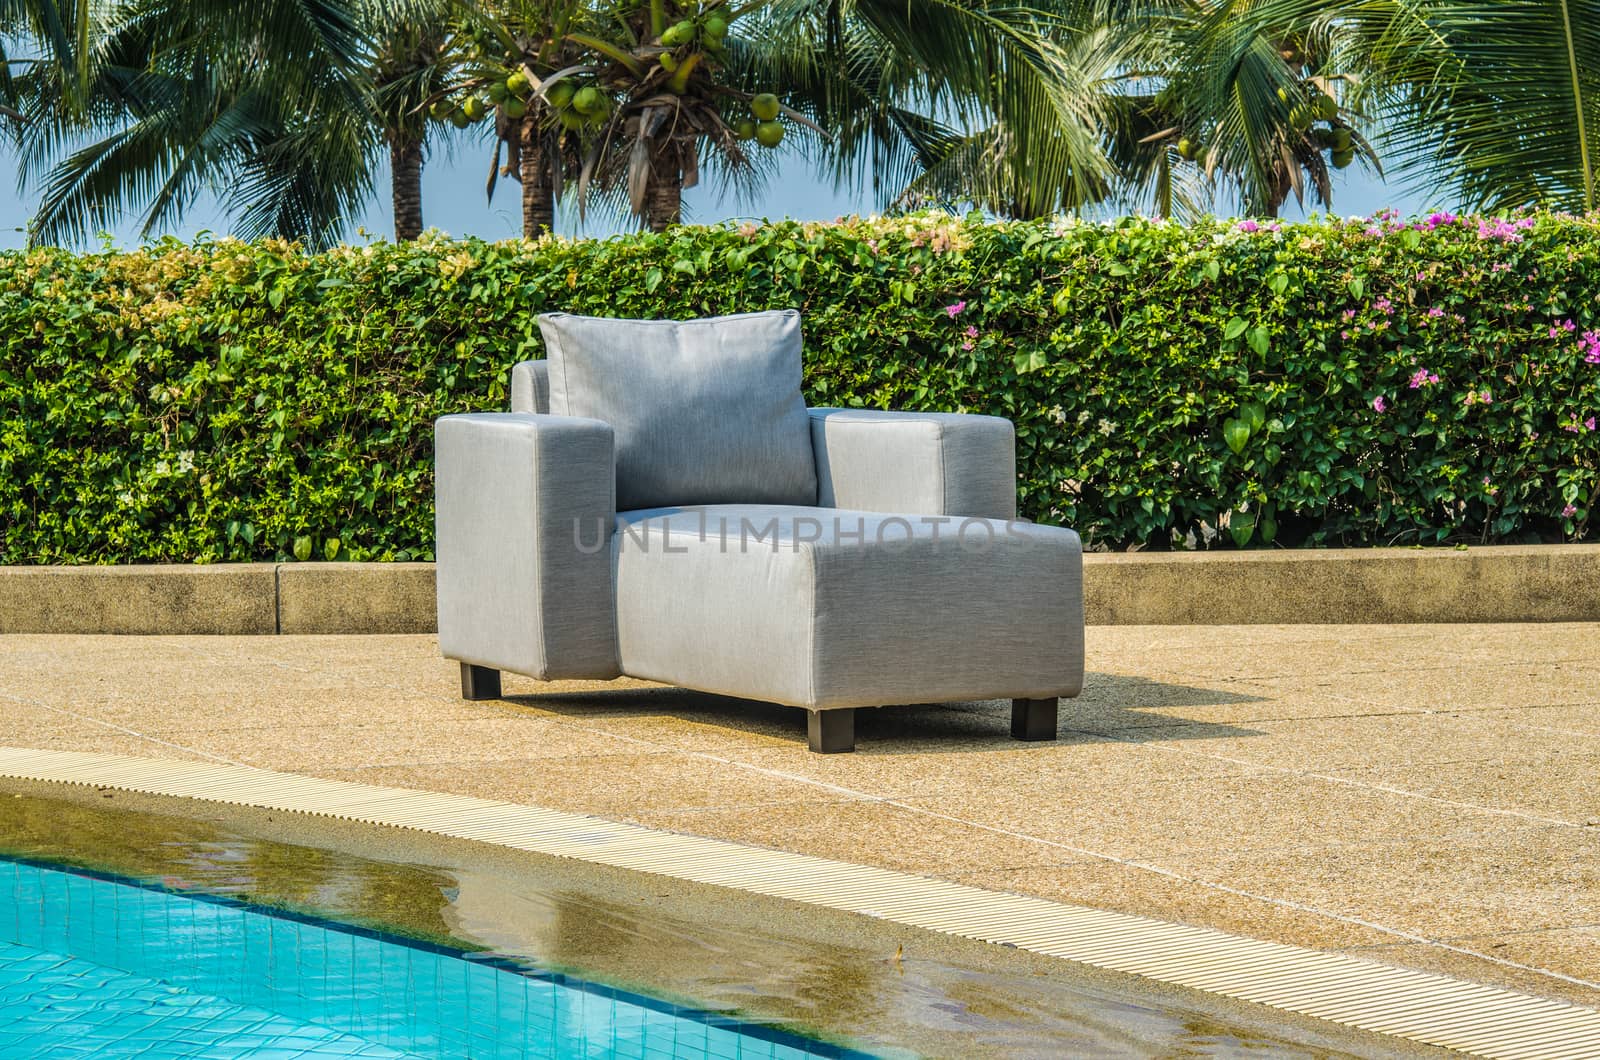 Water resistant outdoor sofa chair with cushions and pillows